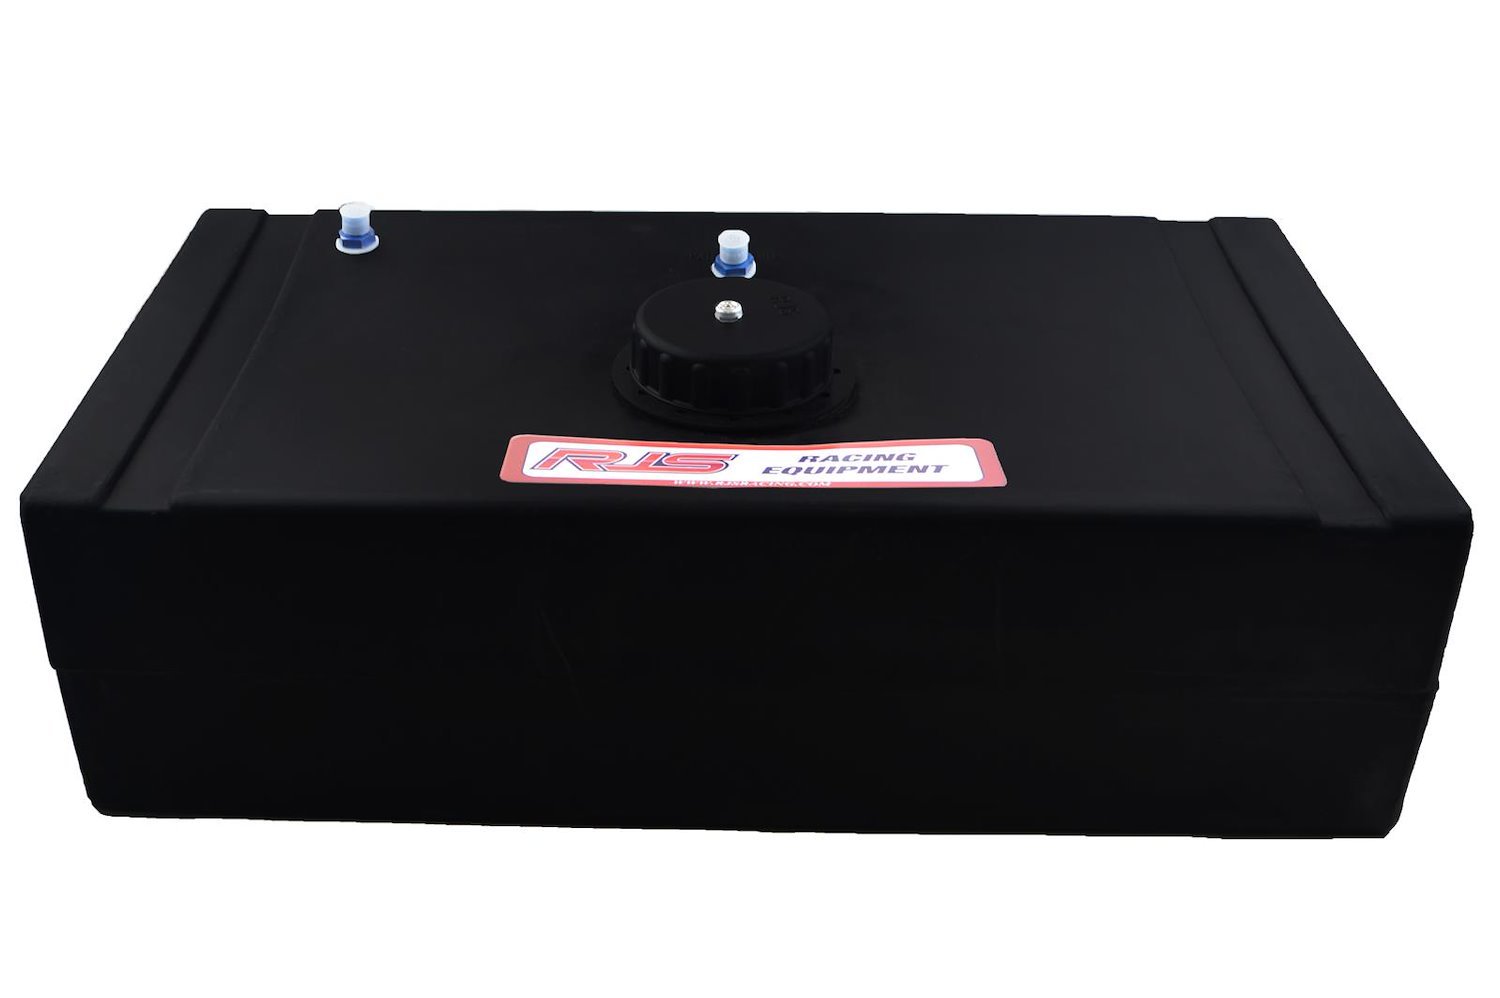 15 Gallon Economy Fuel Cell with Aircraft Style